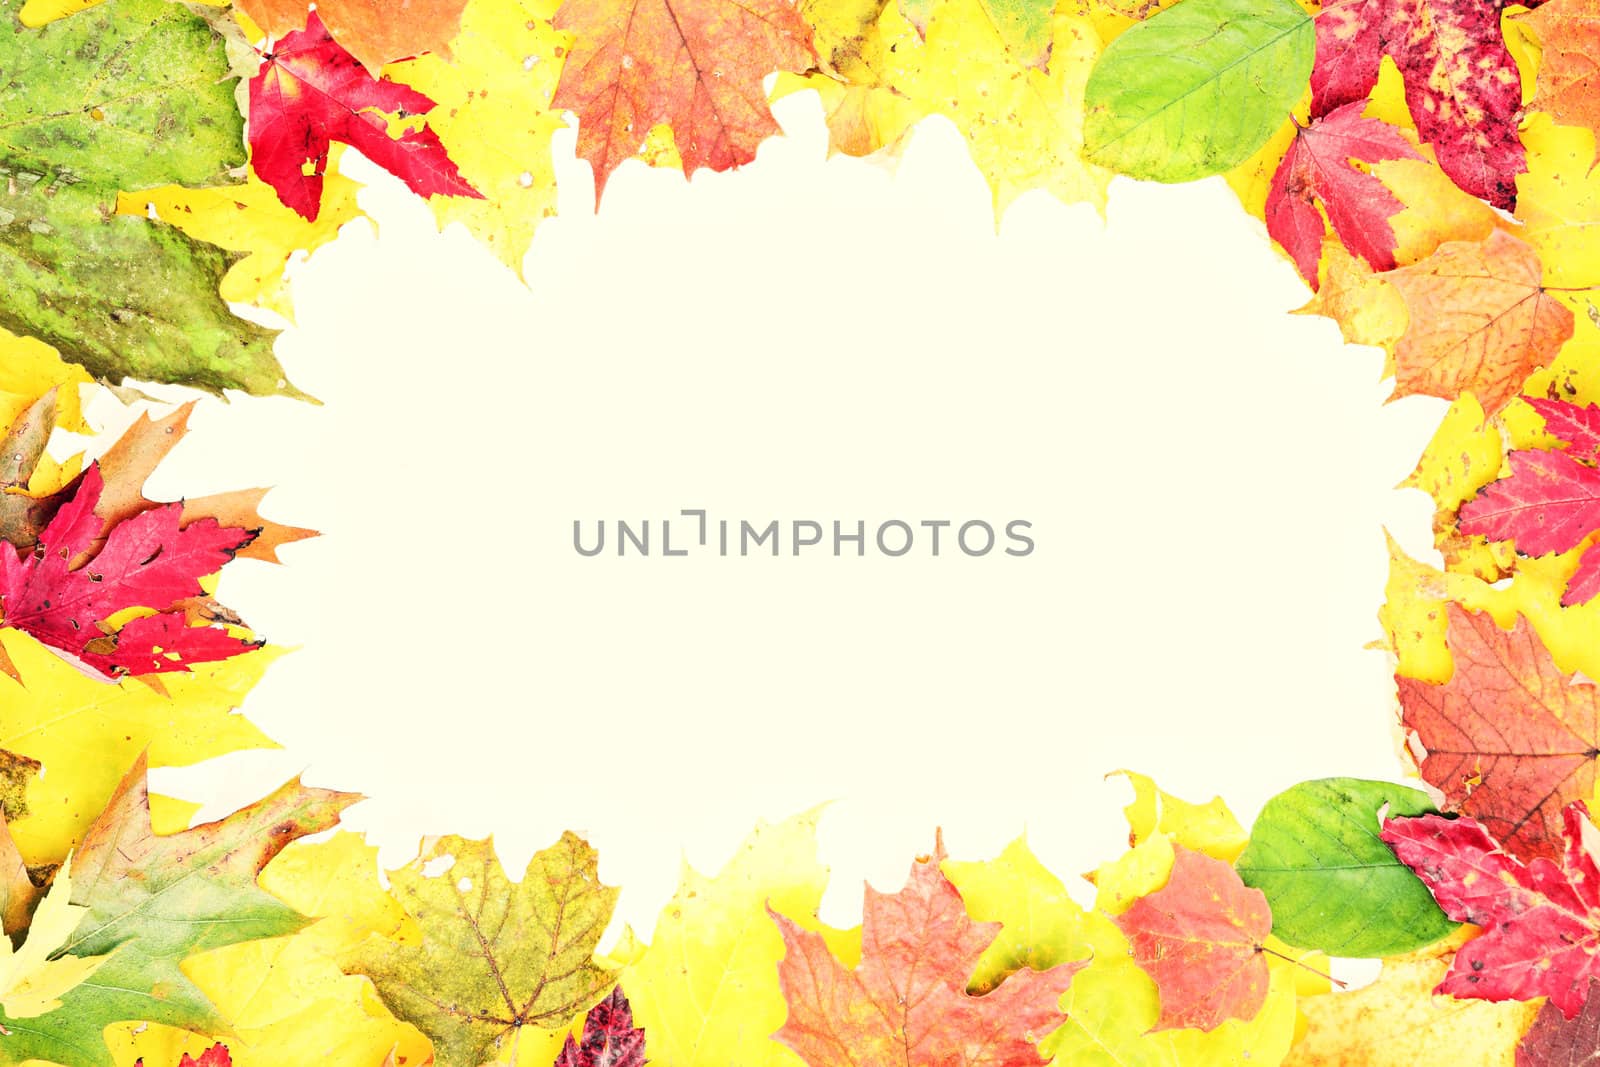 Leaves fall frame in retro style. Real leaves forming a frame. Retro vintage style photo.